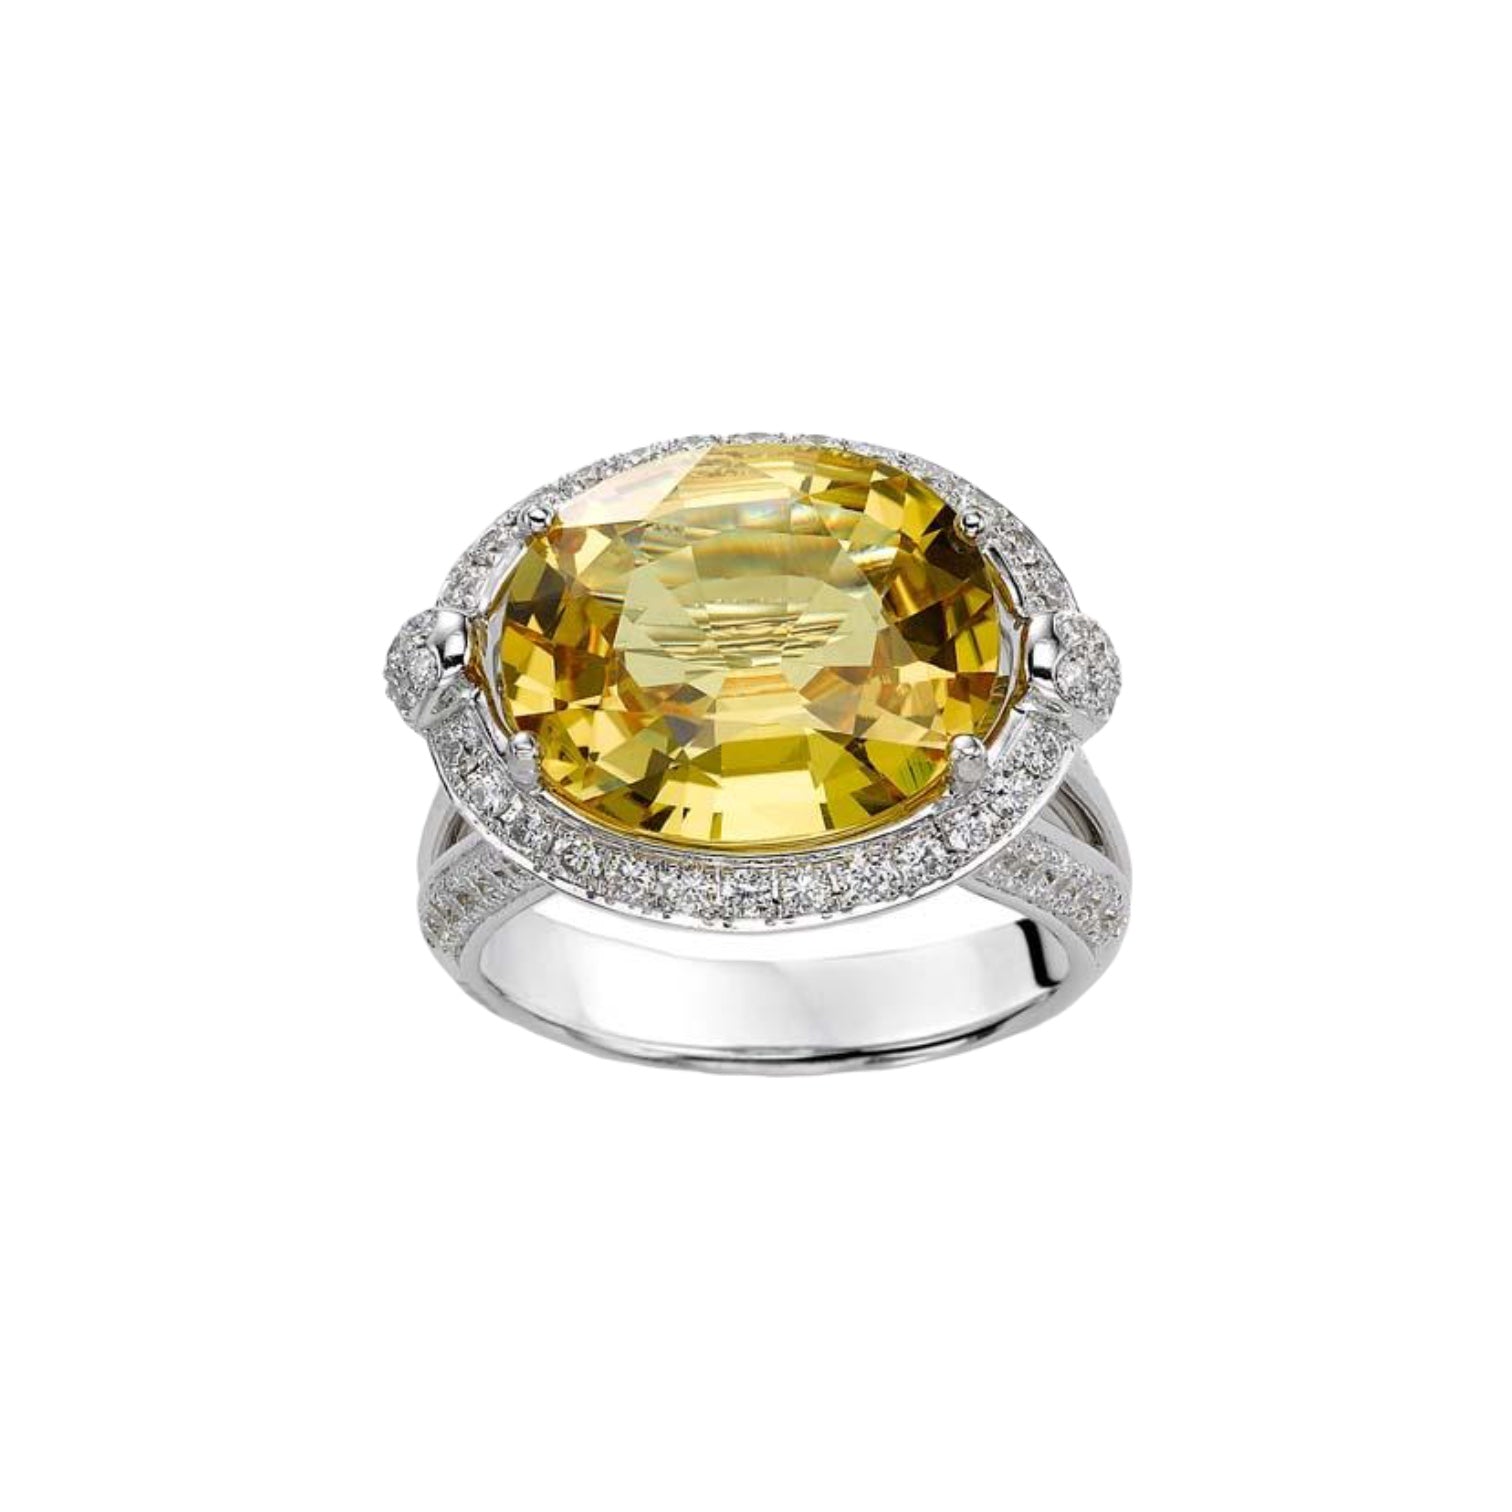 Buy Yellow Sapphire Men's Ring, Sapphire Gold Ring, 18k Solid Gold Ring,  Yellow Gemstone Ring, Engagement Ring, Gold Jewelry, Ascher Cut Ring Online  in India - Etsy